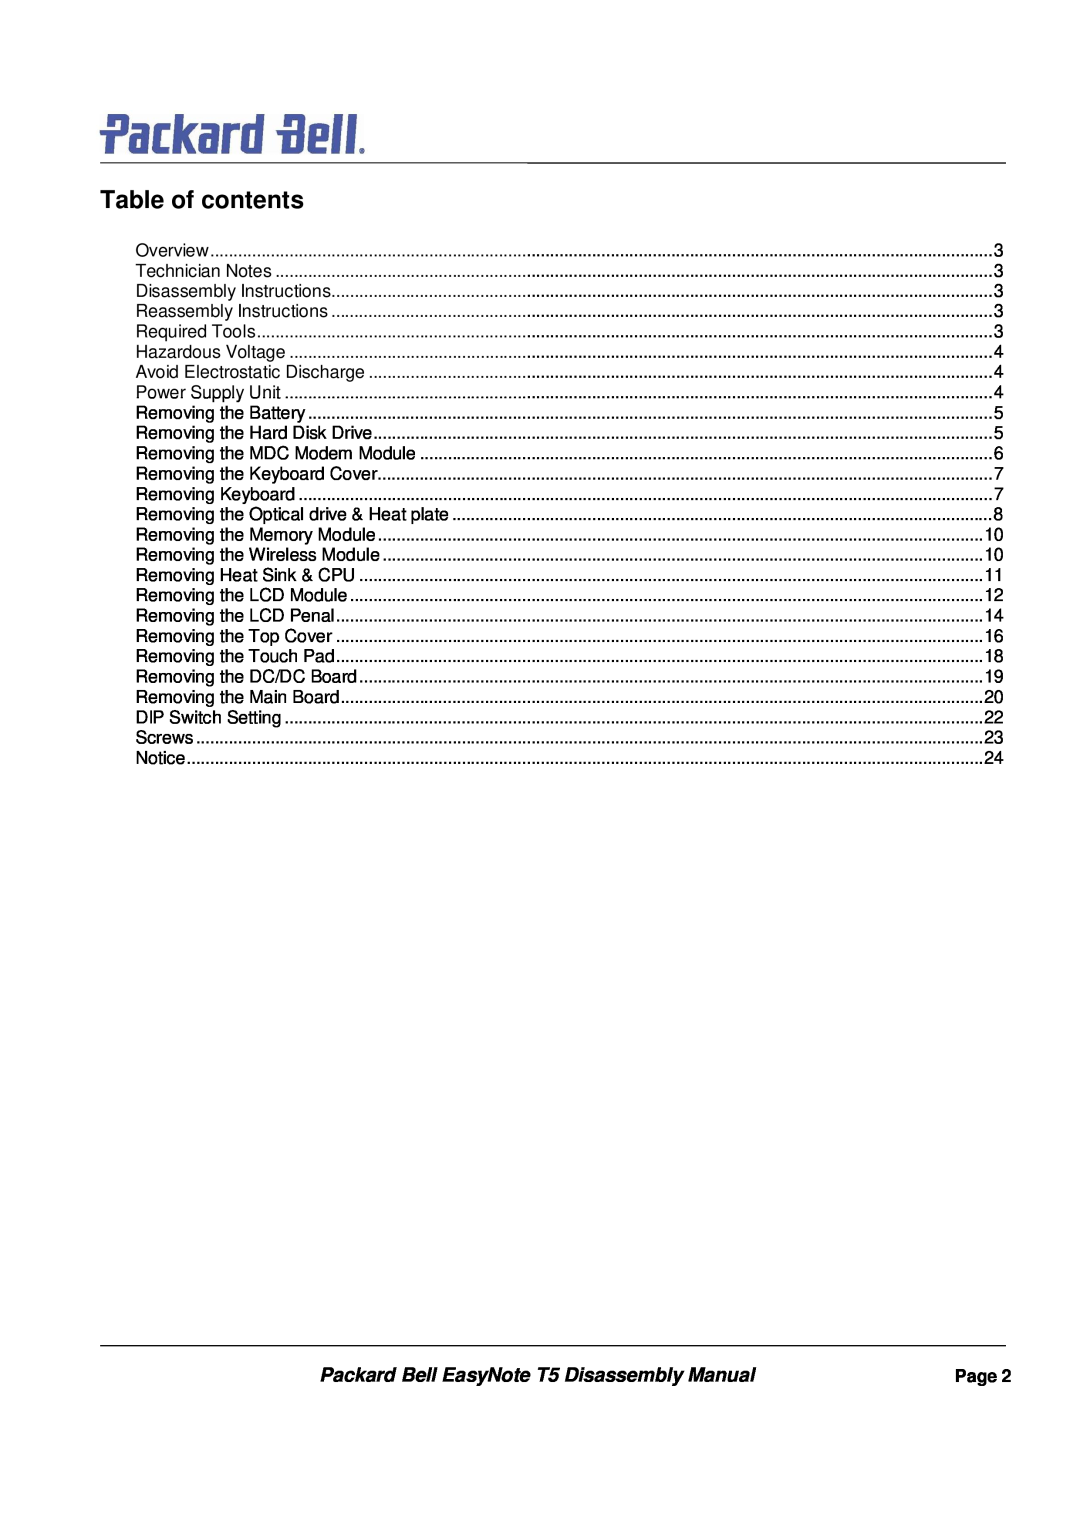 Packard Bell manual Packard Bell EasyNote T5 Disassembly Manual, Table of contents, Page 